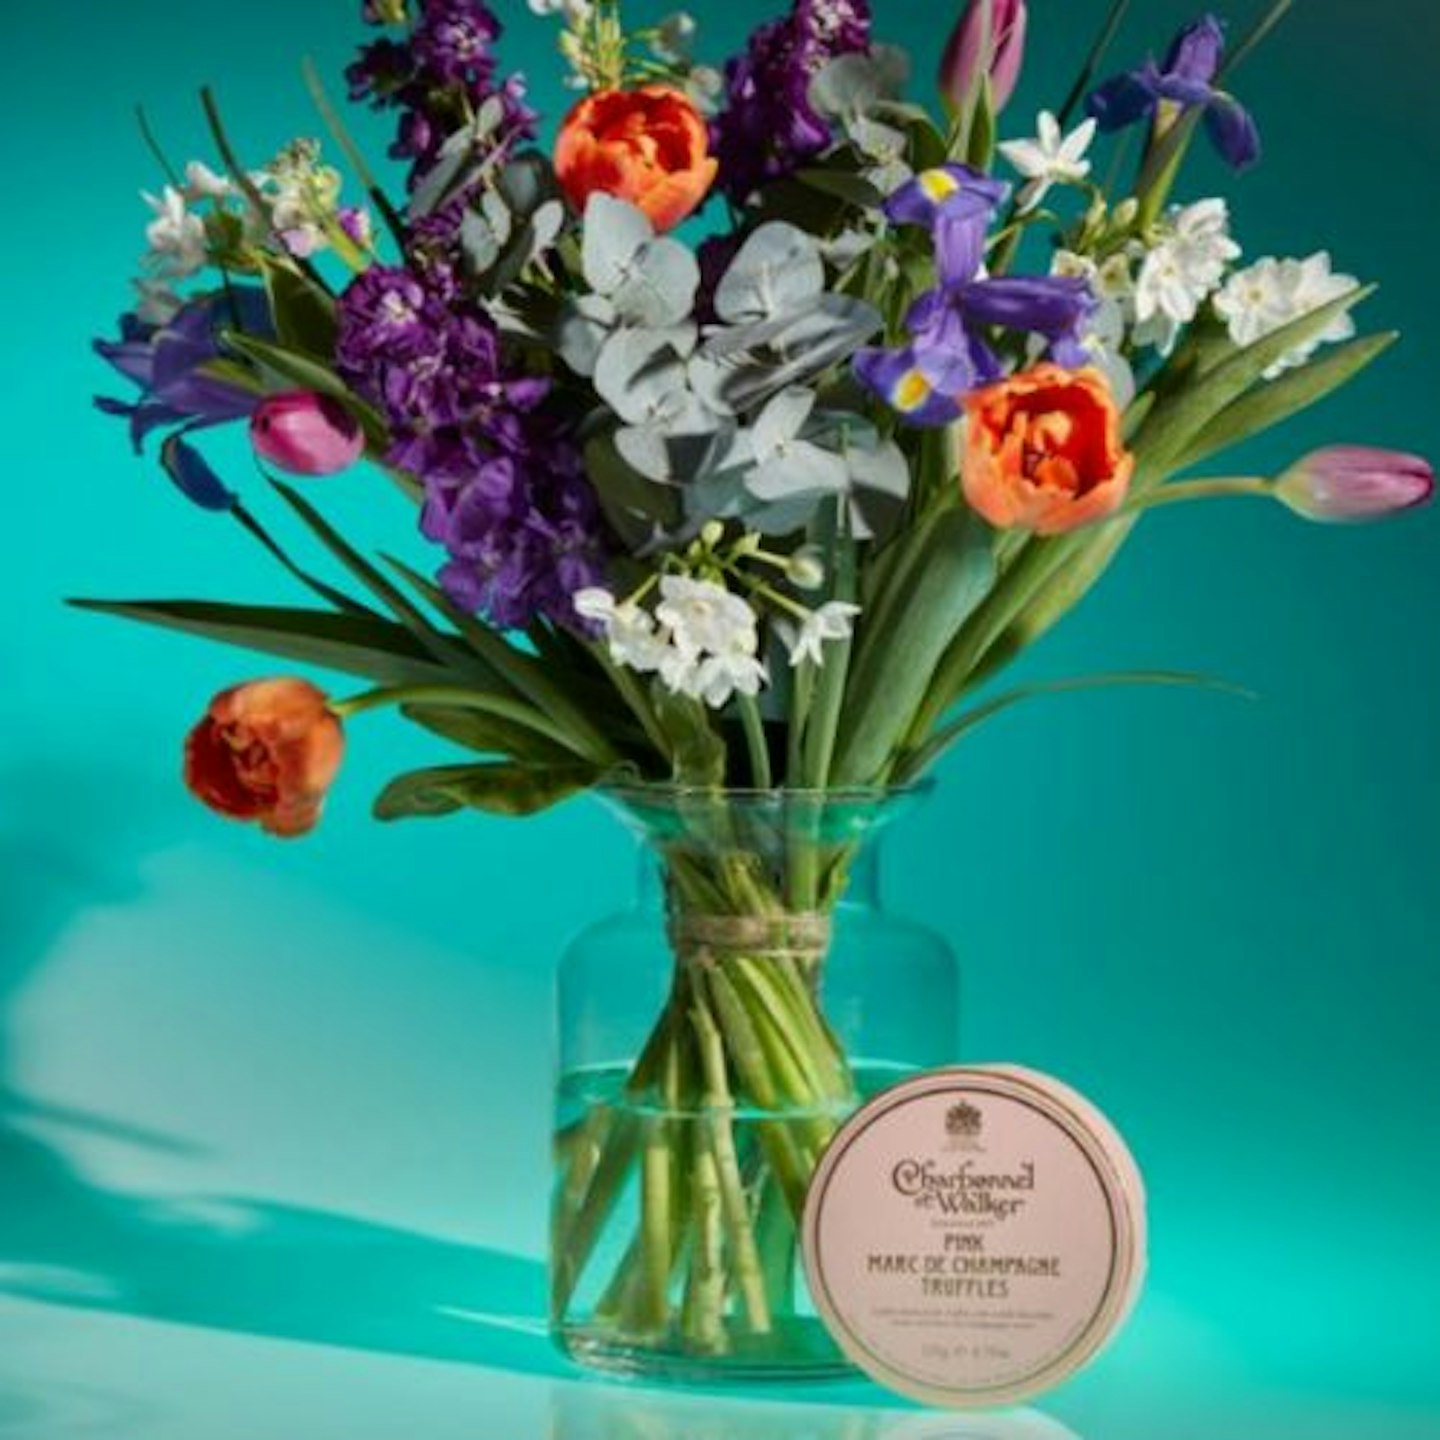 Waitrose Mother’s Day Stocks & Narcissi Bouquet with Charbonnel et Walker Chocolate Truffles